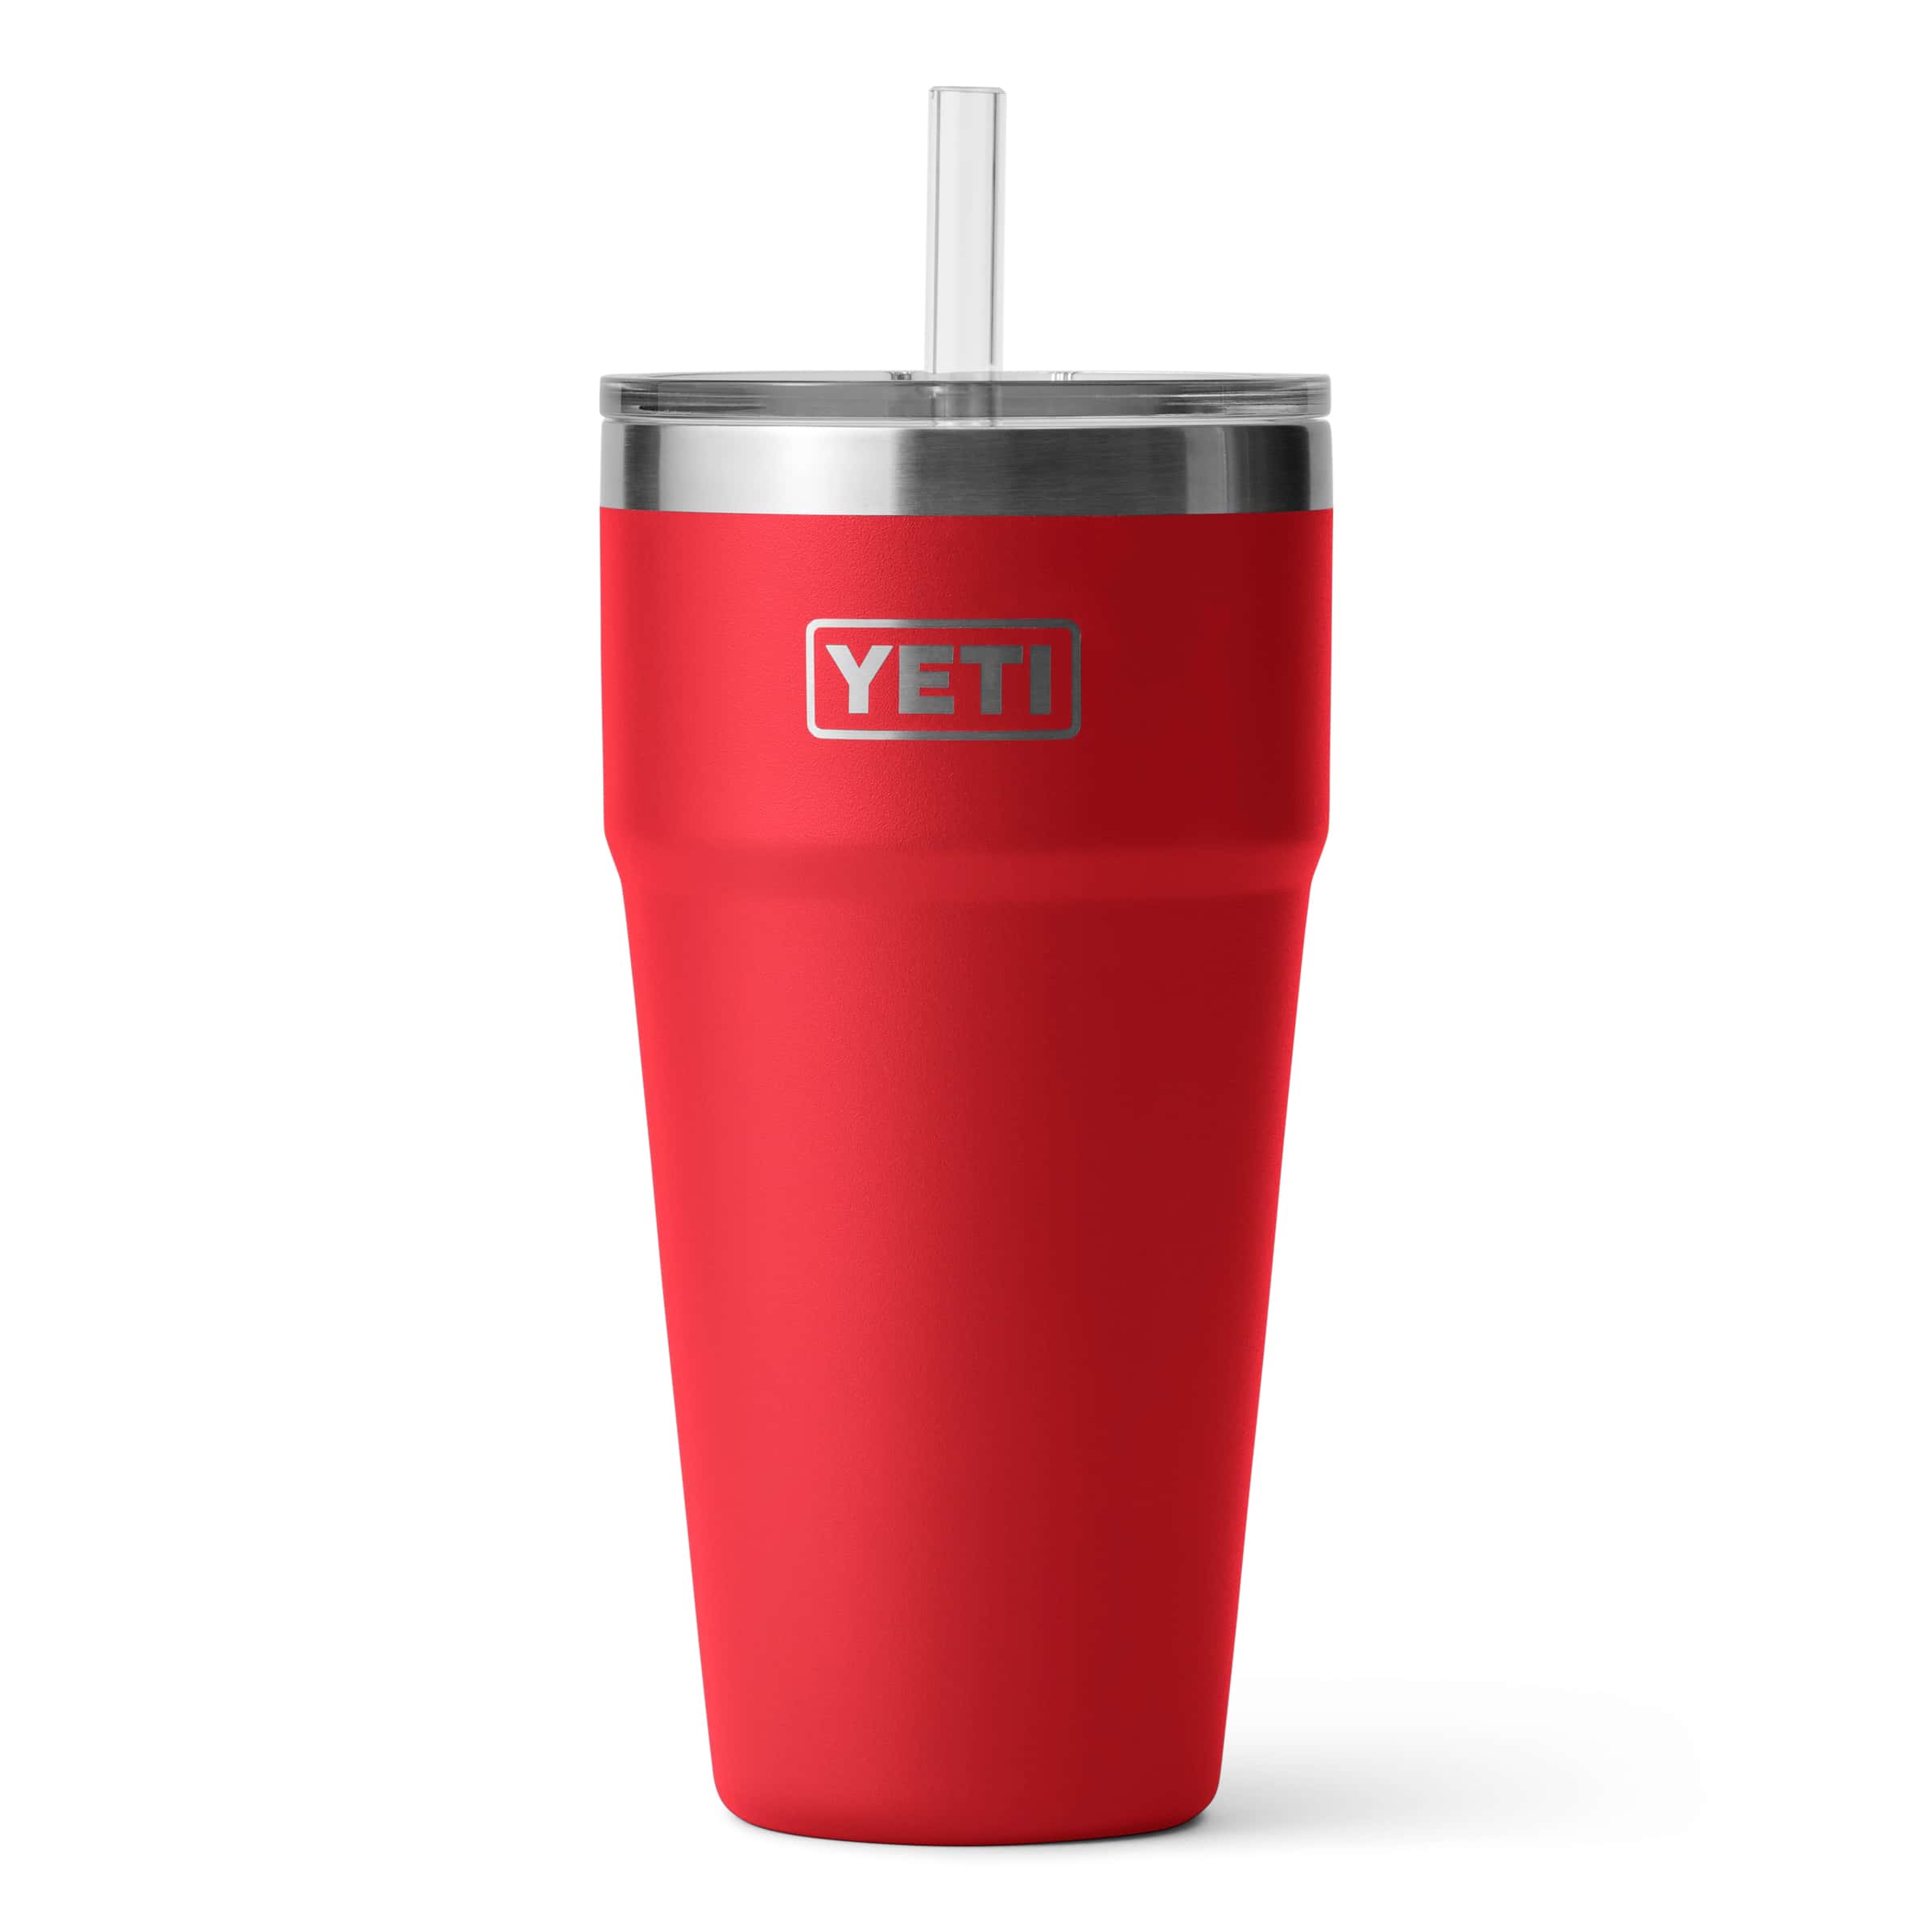  MERRY CHRISTMAS Red 30 oz Tumbler With Straw and Slide Top Lid, Stainless Steel Travel Mug